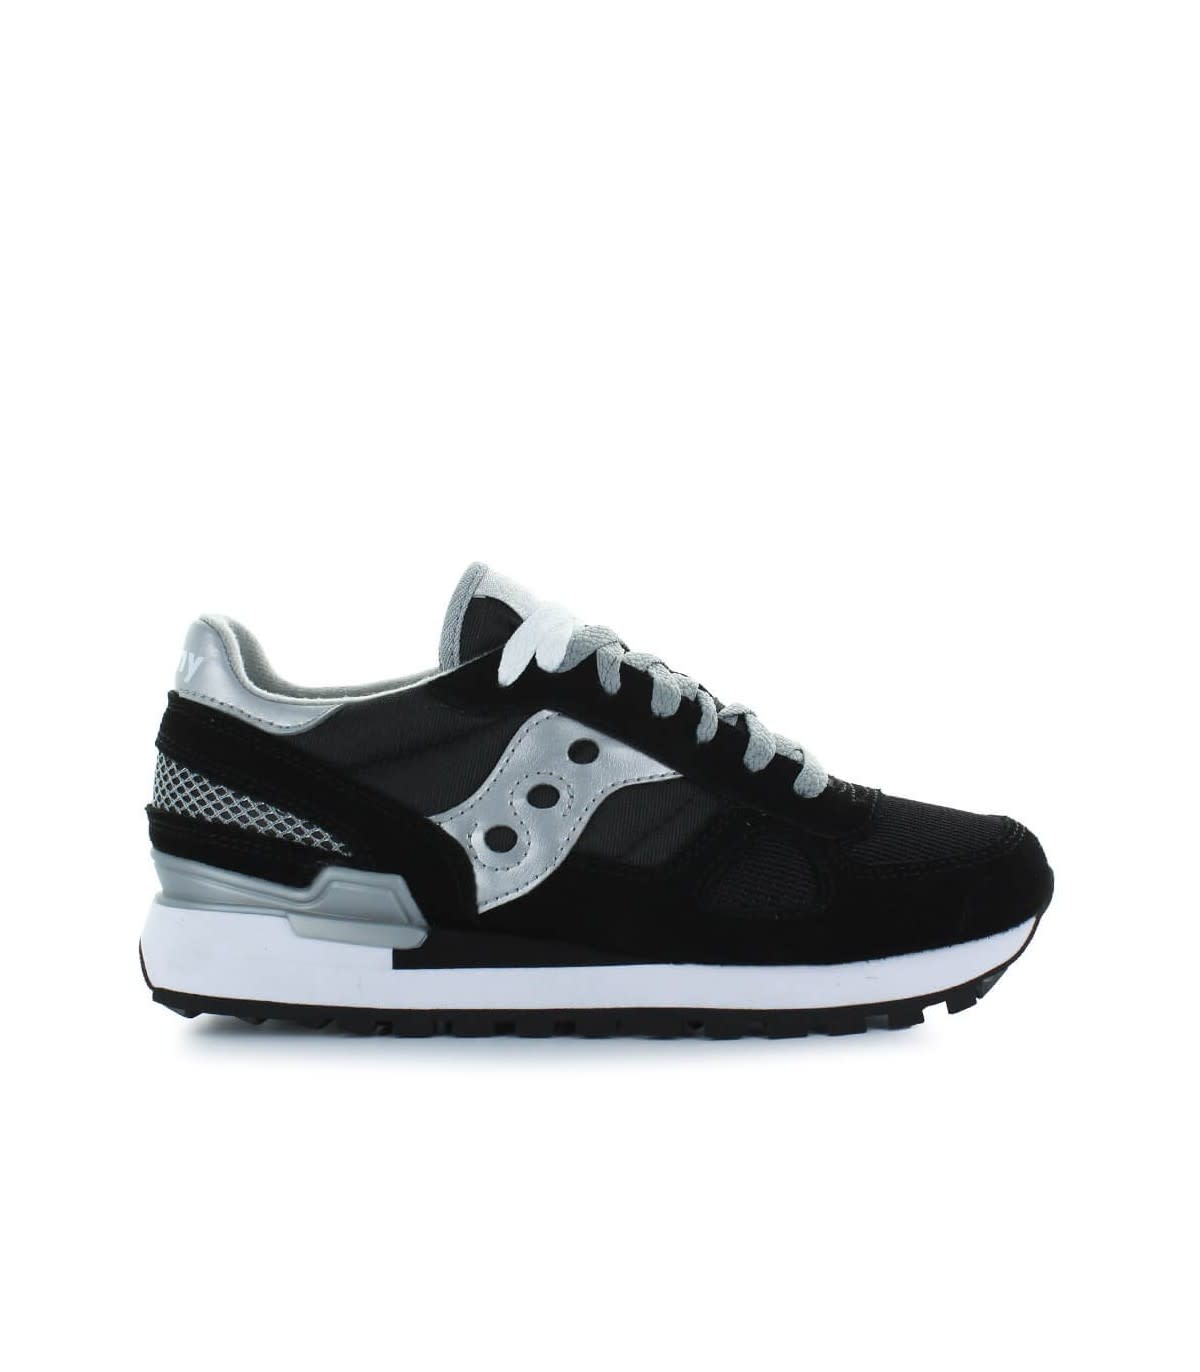 saucony silver sneakers off 74% - www 